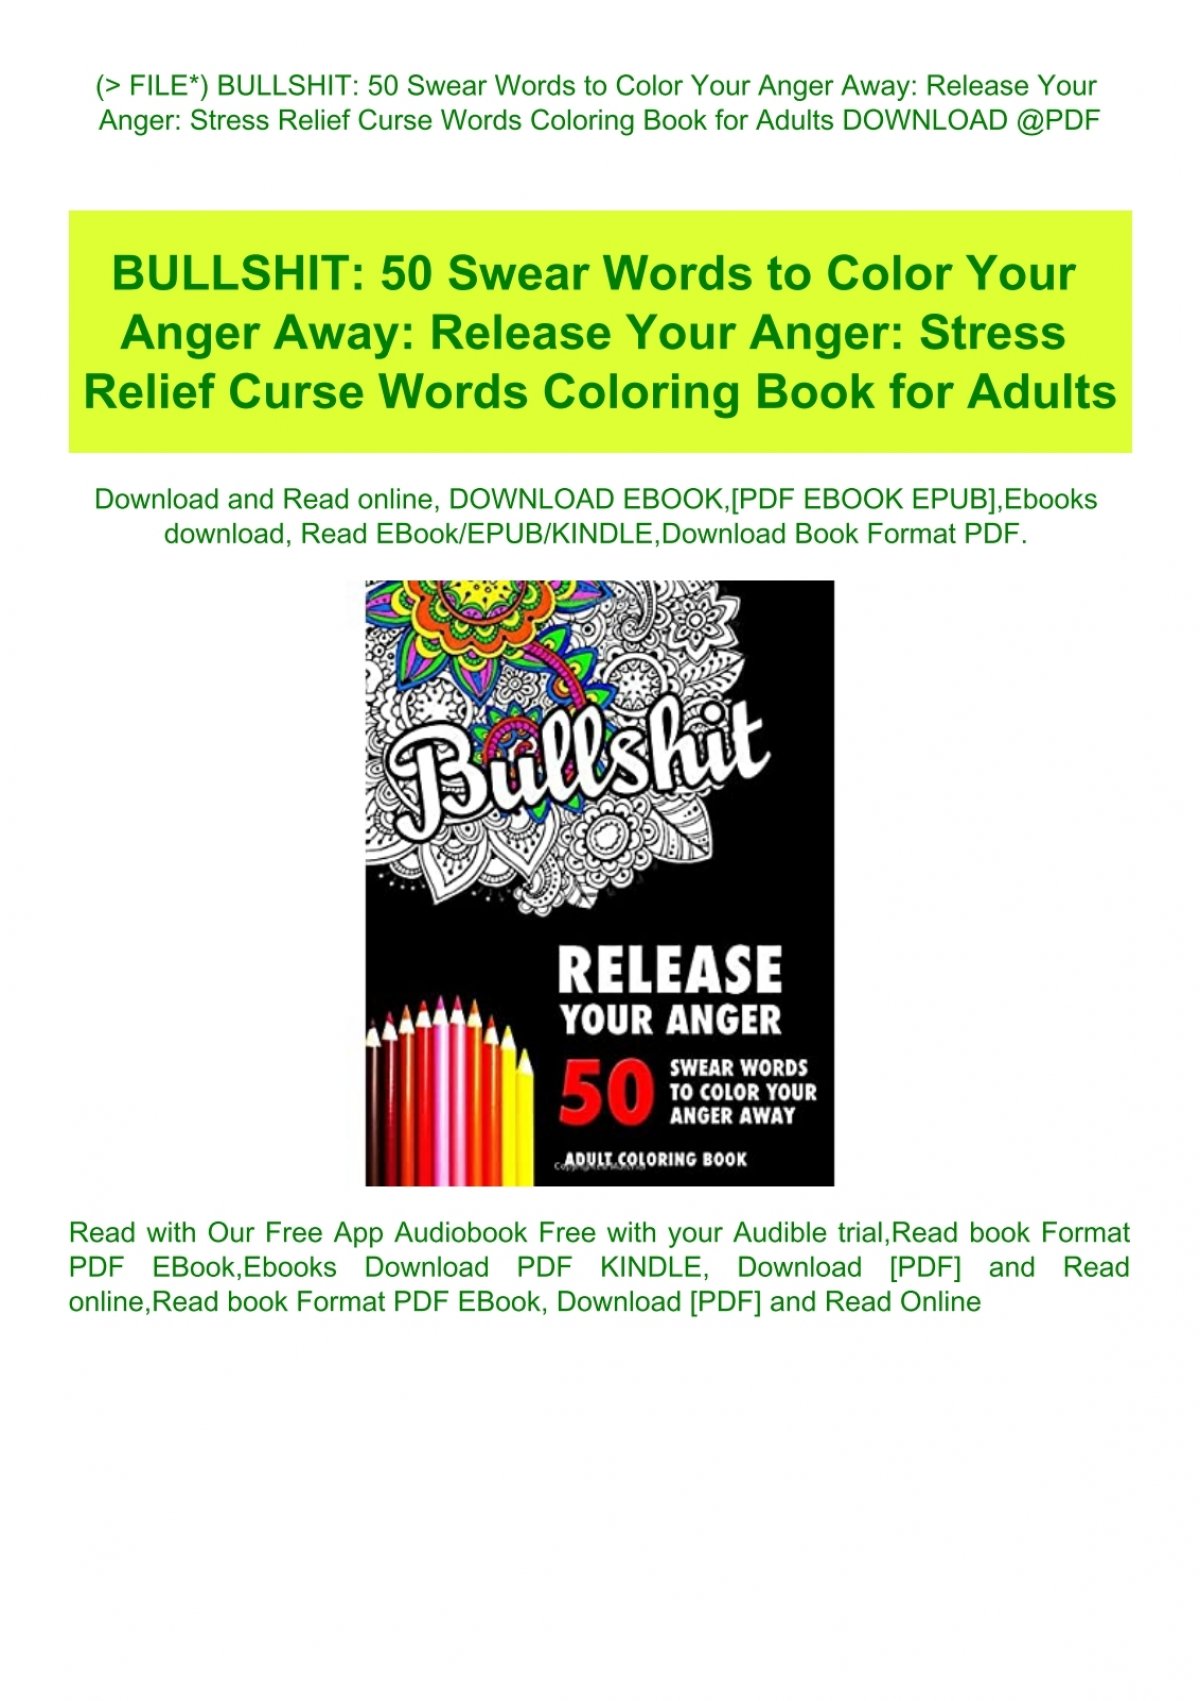 Download P D F File Bullshit 50 Swear Words To Color Your Anger Away Release Your Anger Stress Relief Curse Words Coloring Book For Adults Download Pdf